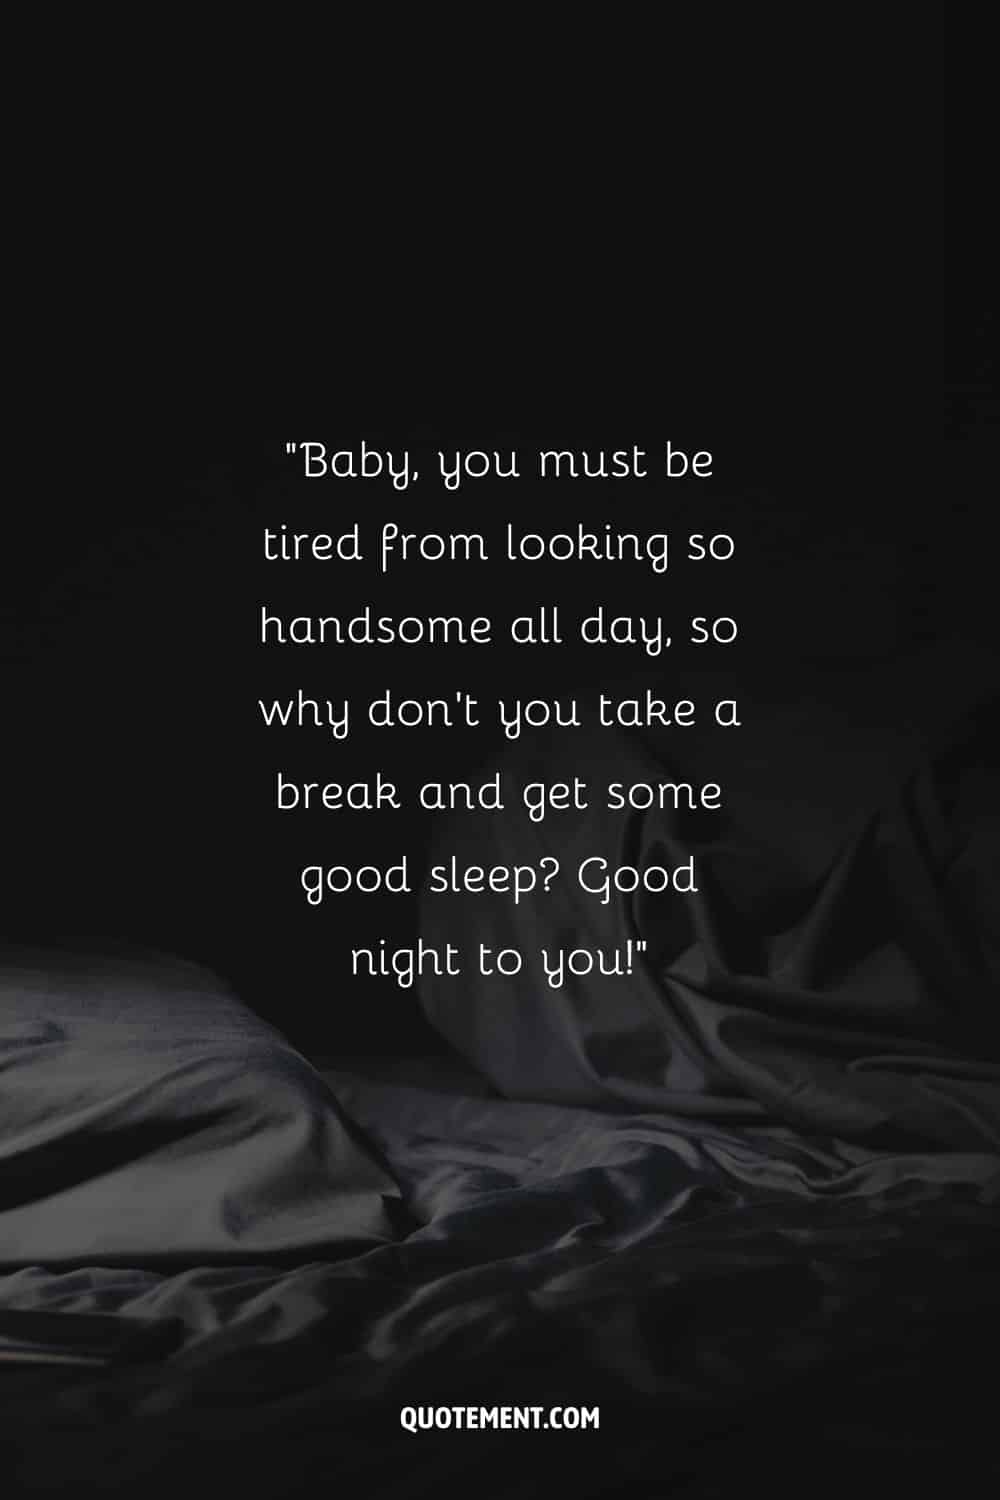 unmade bed representing flirty good night message